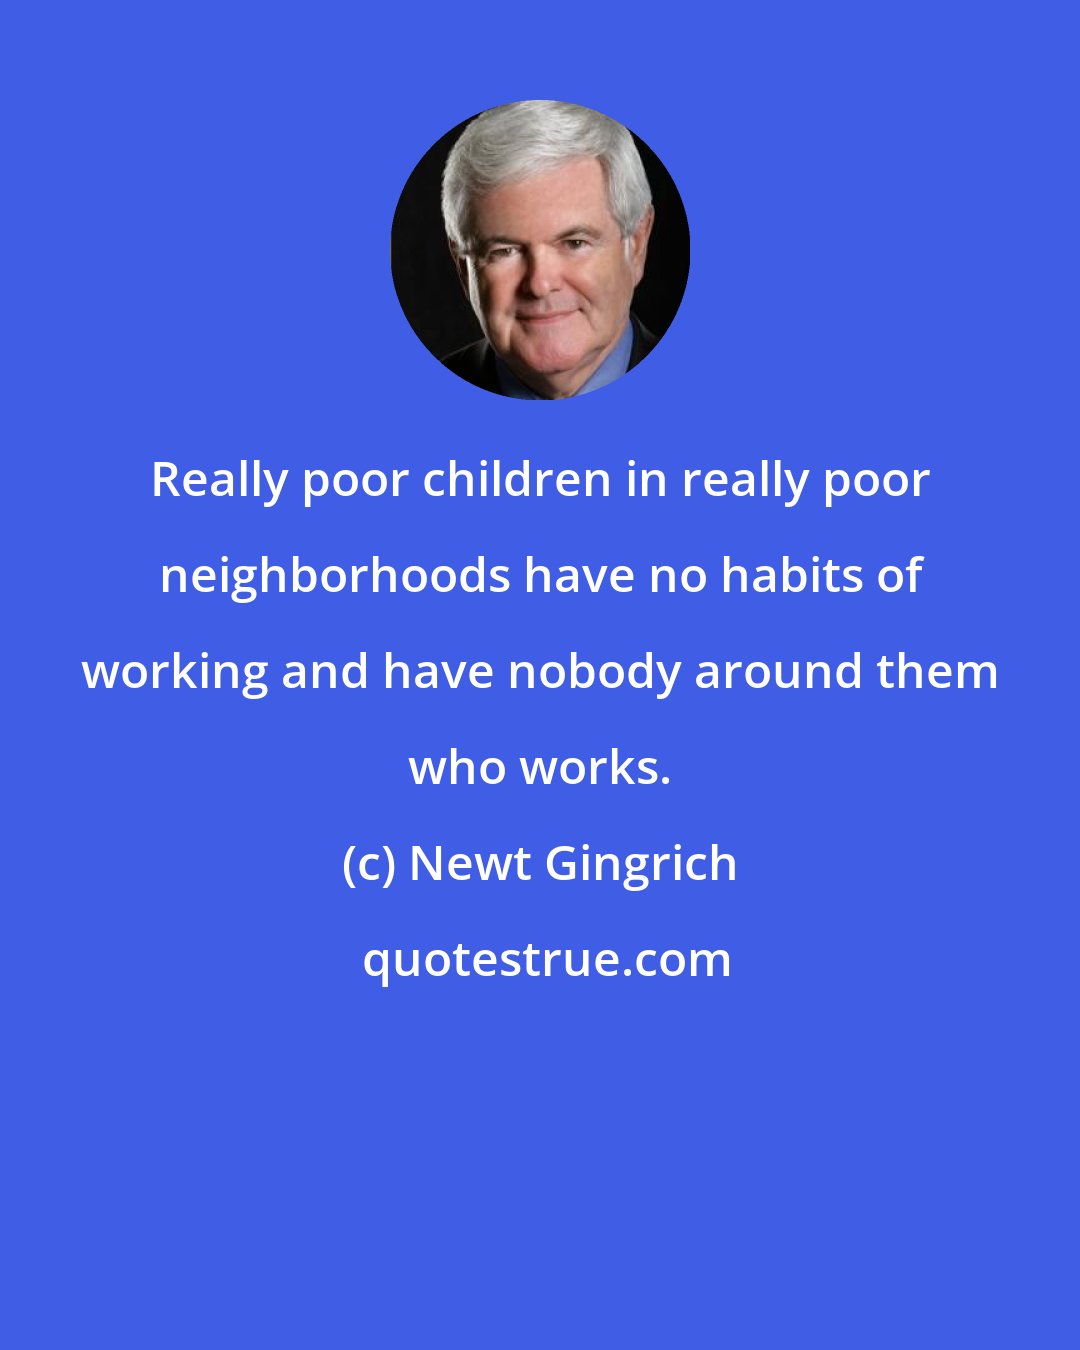 Newt Gingrich: Really poor children in really poor neighborhoods have no habits of working and have nobody around them who works.